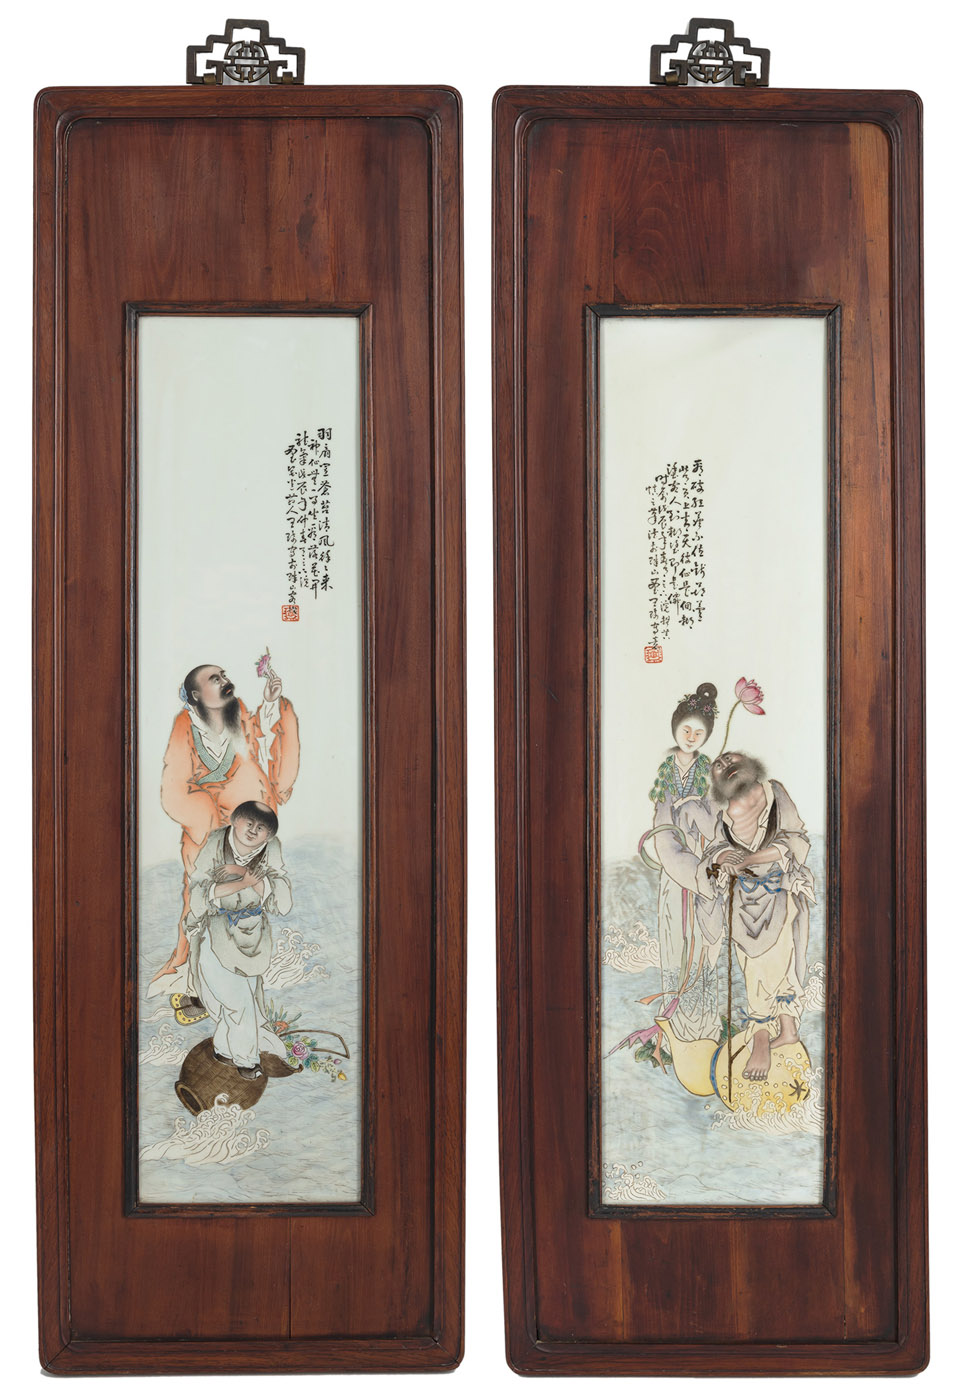 TWO 'FAMILLE ROSE' PORCELAIN TILES IN WOODEN PANELS DEPICTING FOUR IMMORTALS